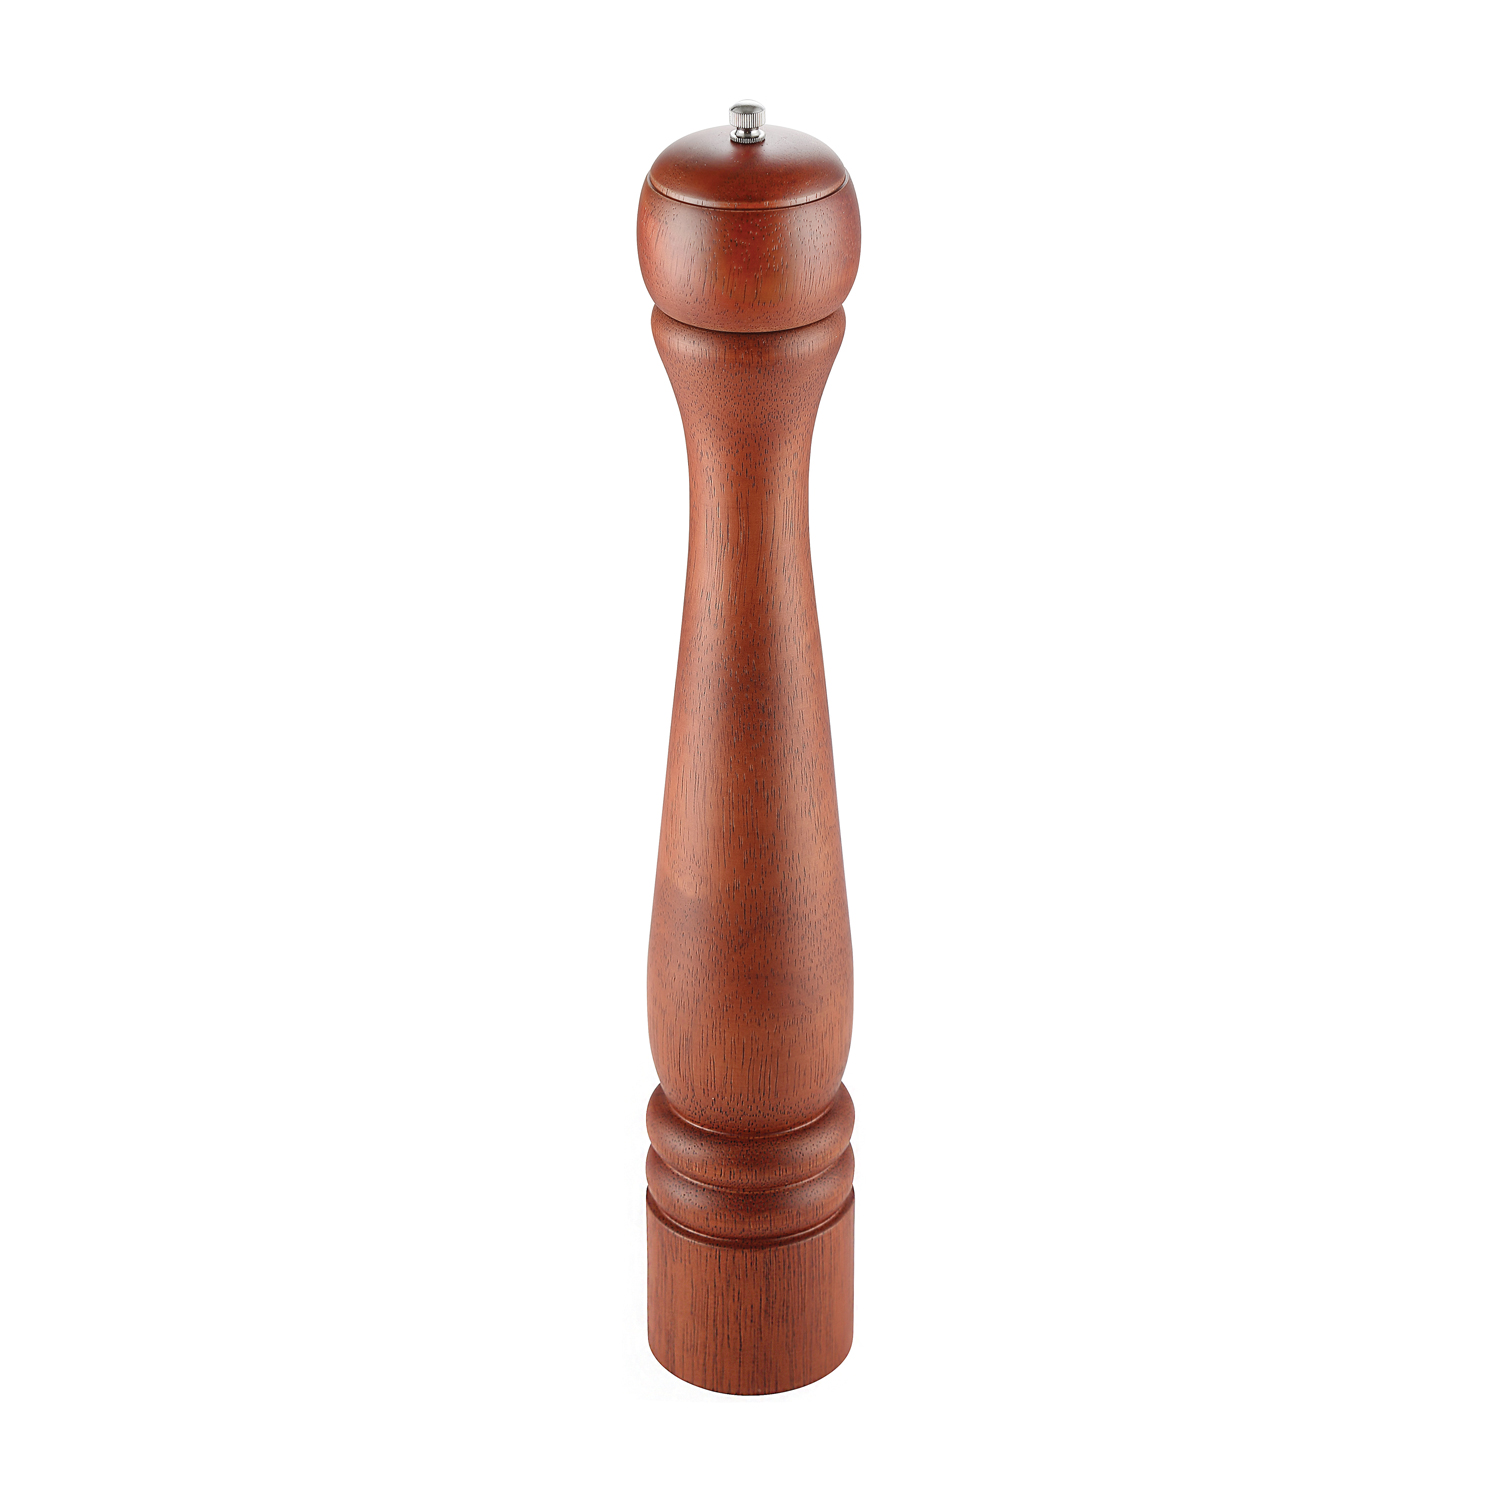 CAC China PMW1-18BN Pepper Mill Wooden Brown 18"H